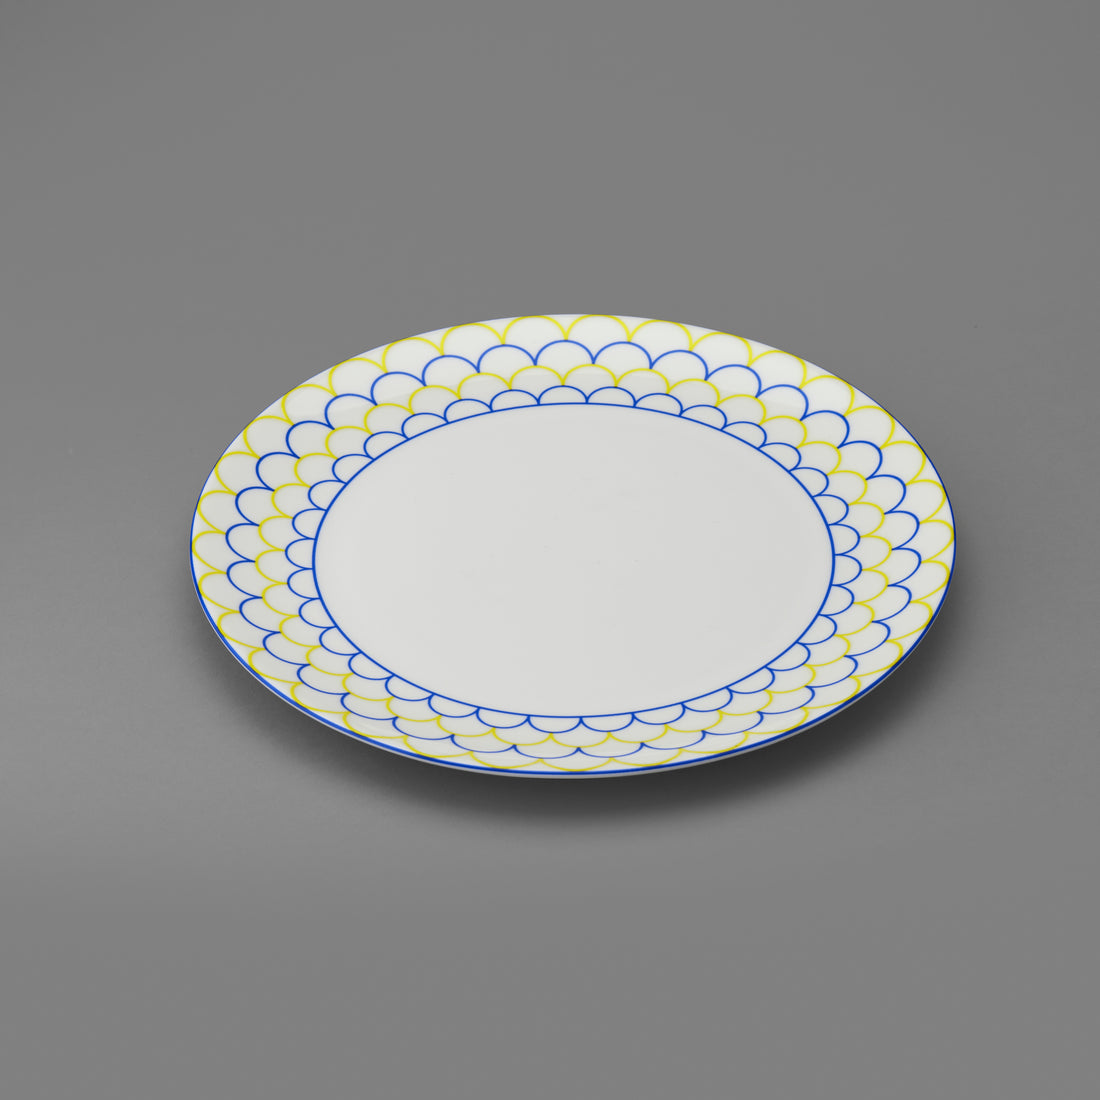 Ripple Teaplate in Yellow & Blue